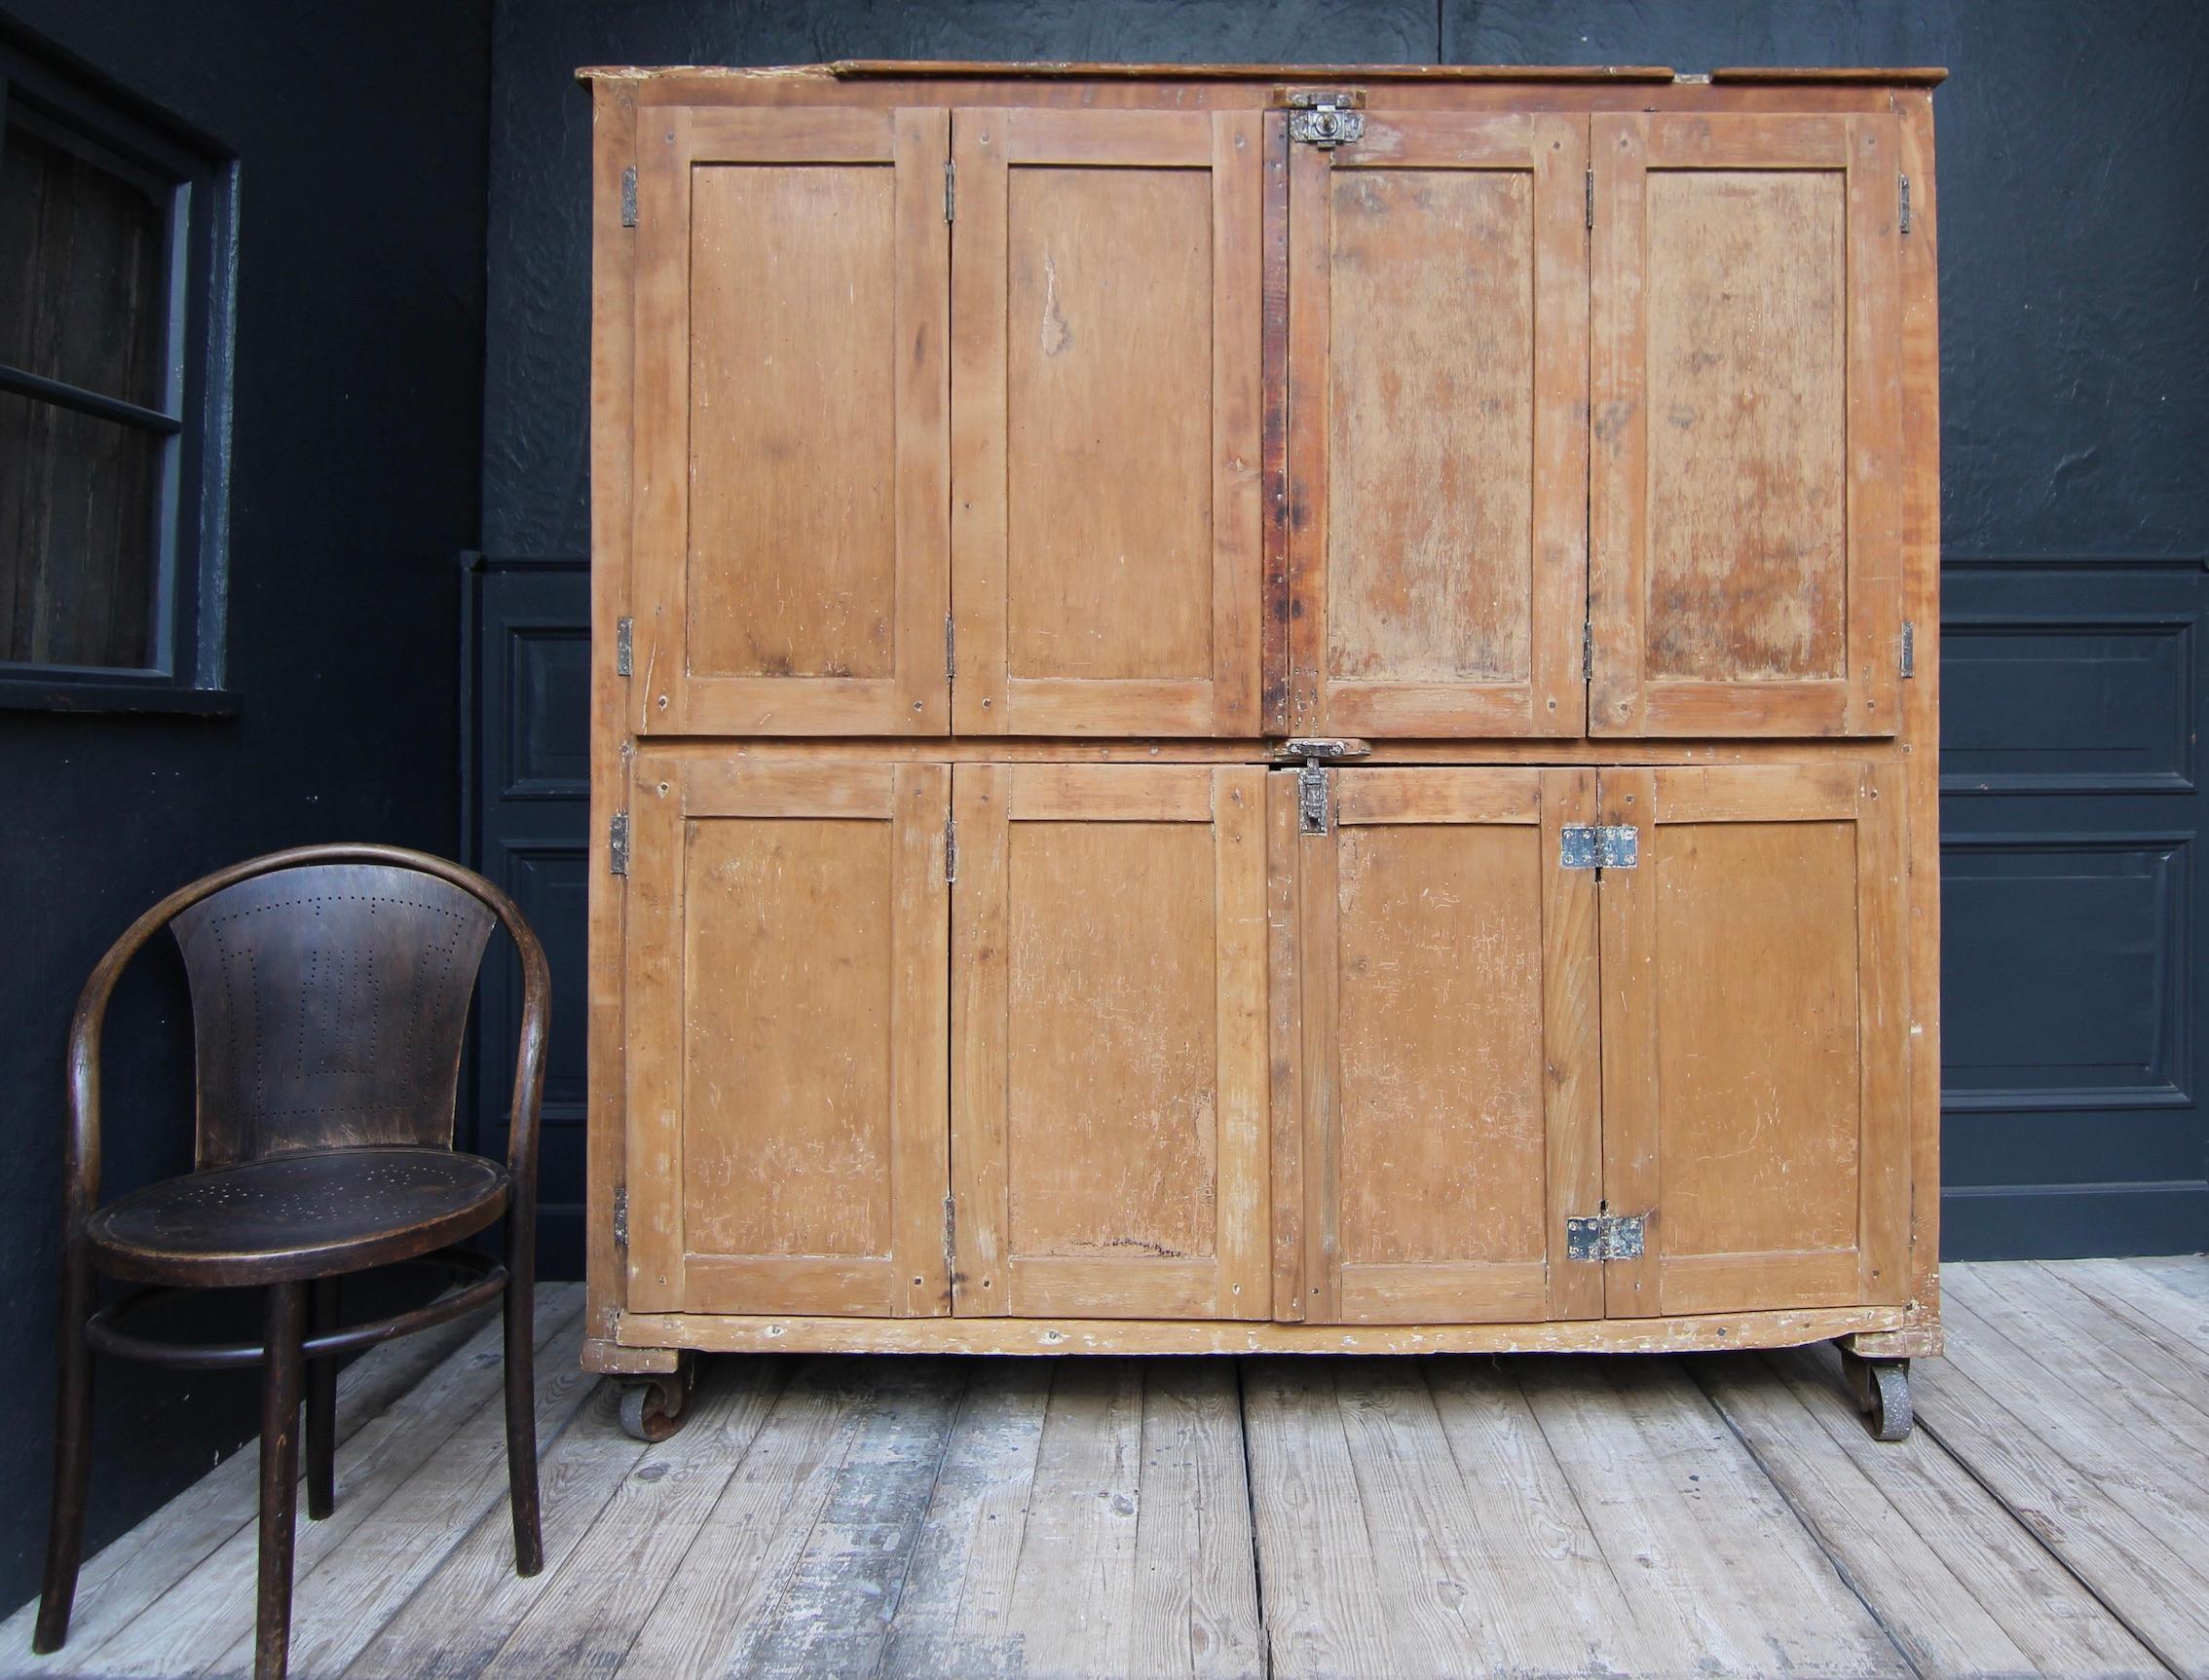 Large vintage bakery cupboard or proofing cupboard from the 1st half of the 20th century. 
Simple rectangular coffered beechwood corpus on industrial iron castors. Behind folding doors are a total of 4 large pull-out shelves made of coniferous wood